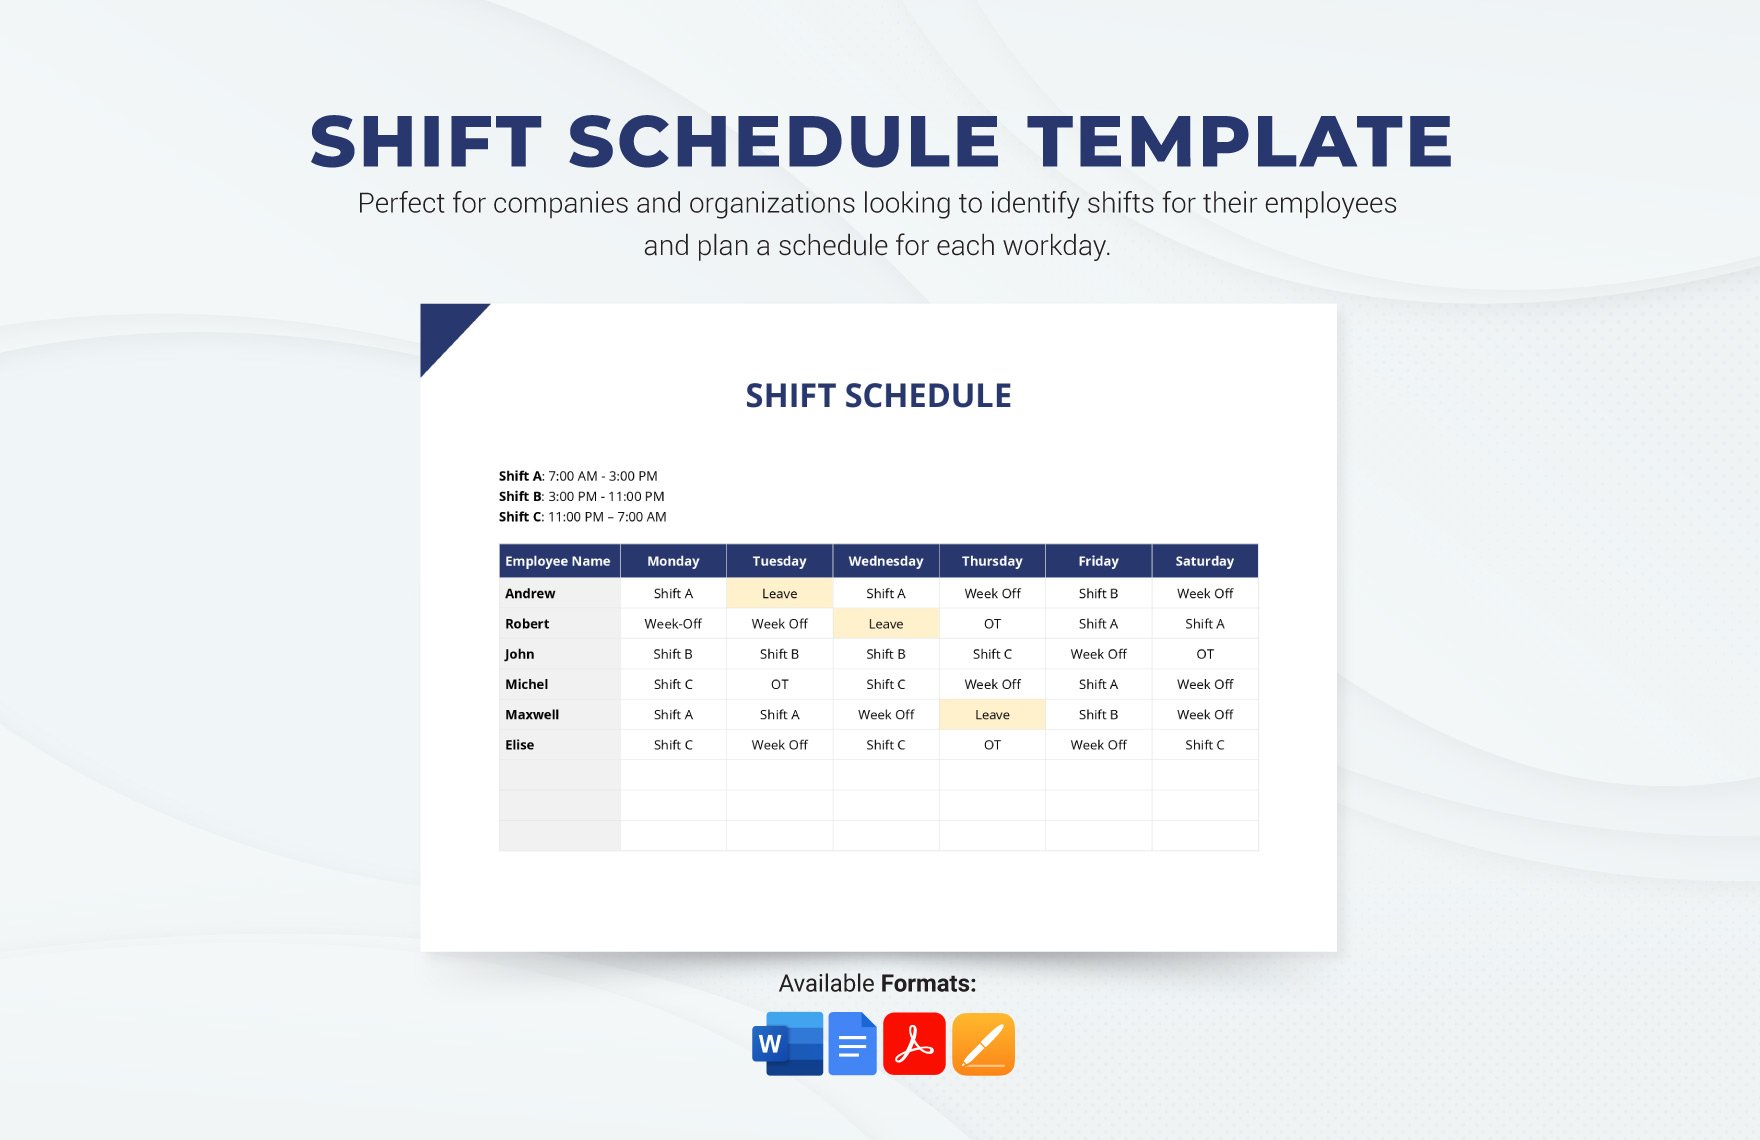 Shift Schedule Template in Word, Google Docs, PDF, Apple Pages